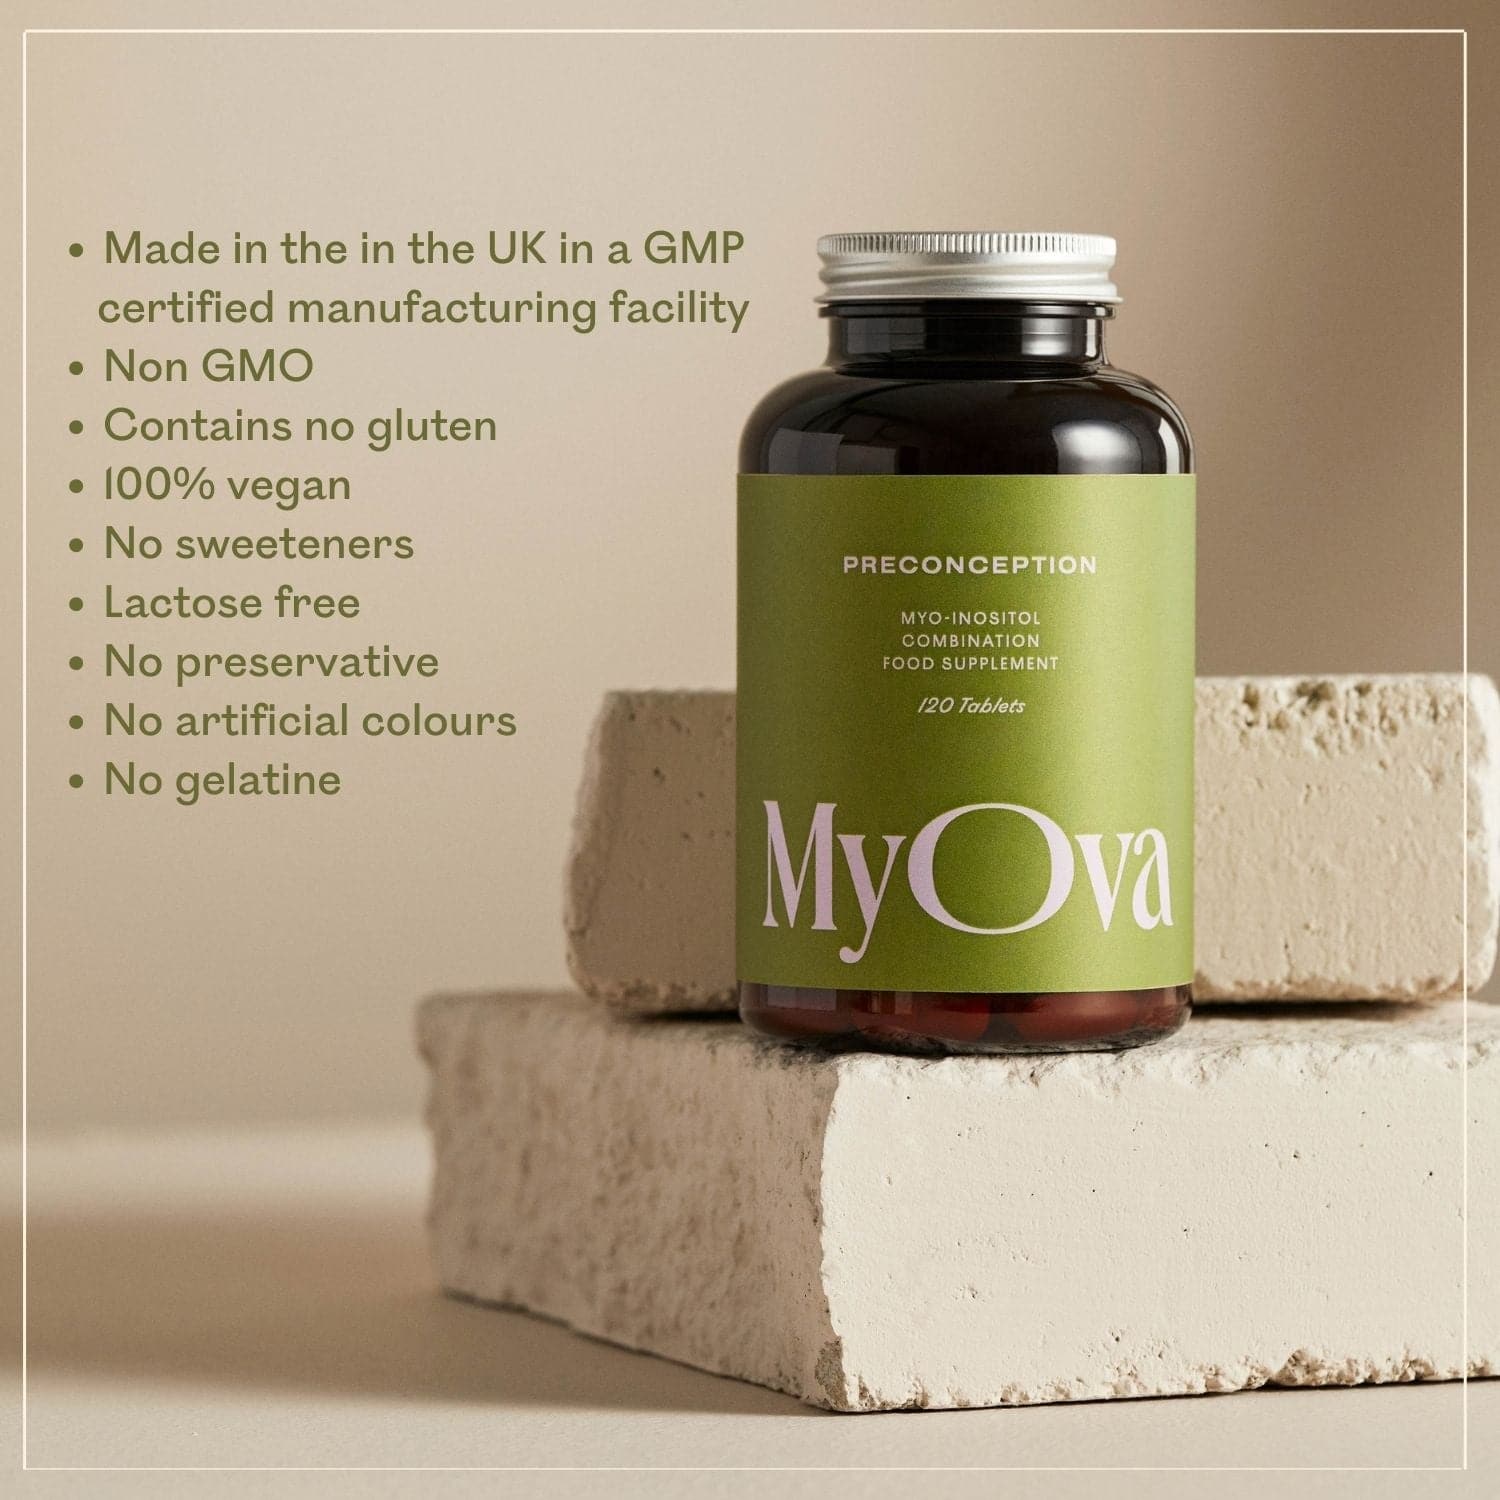 MyOva Preconception Fertility Product - Made In the UK